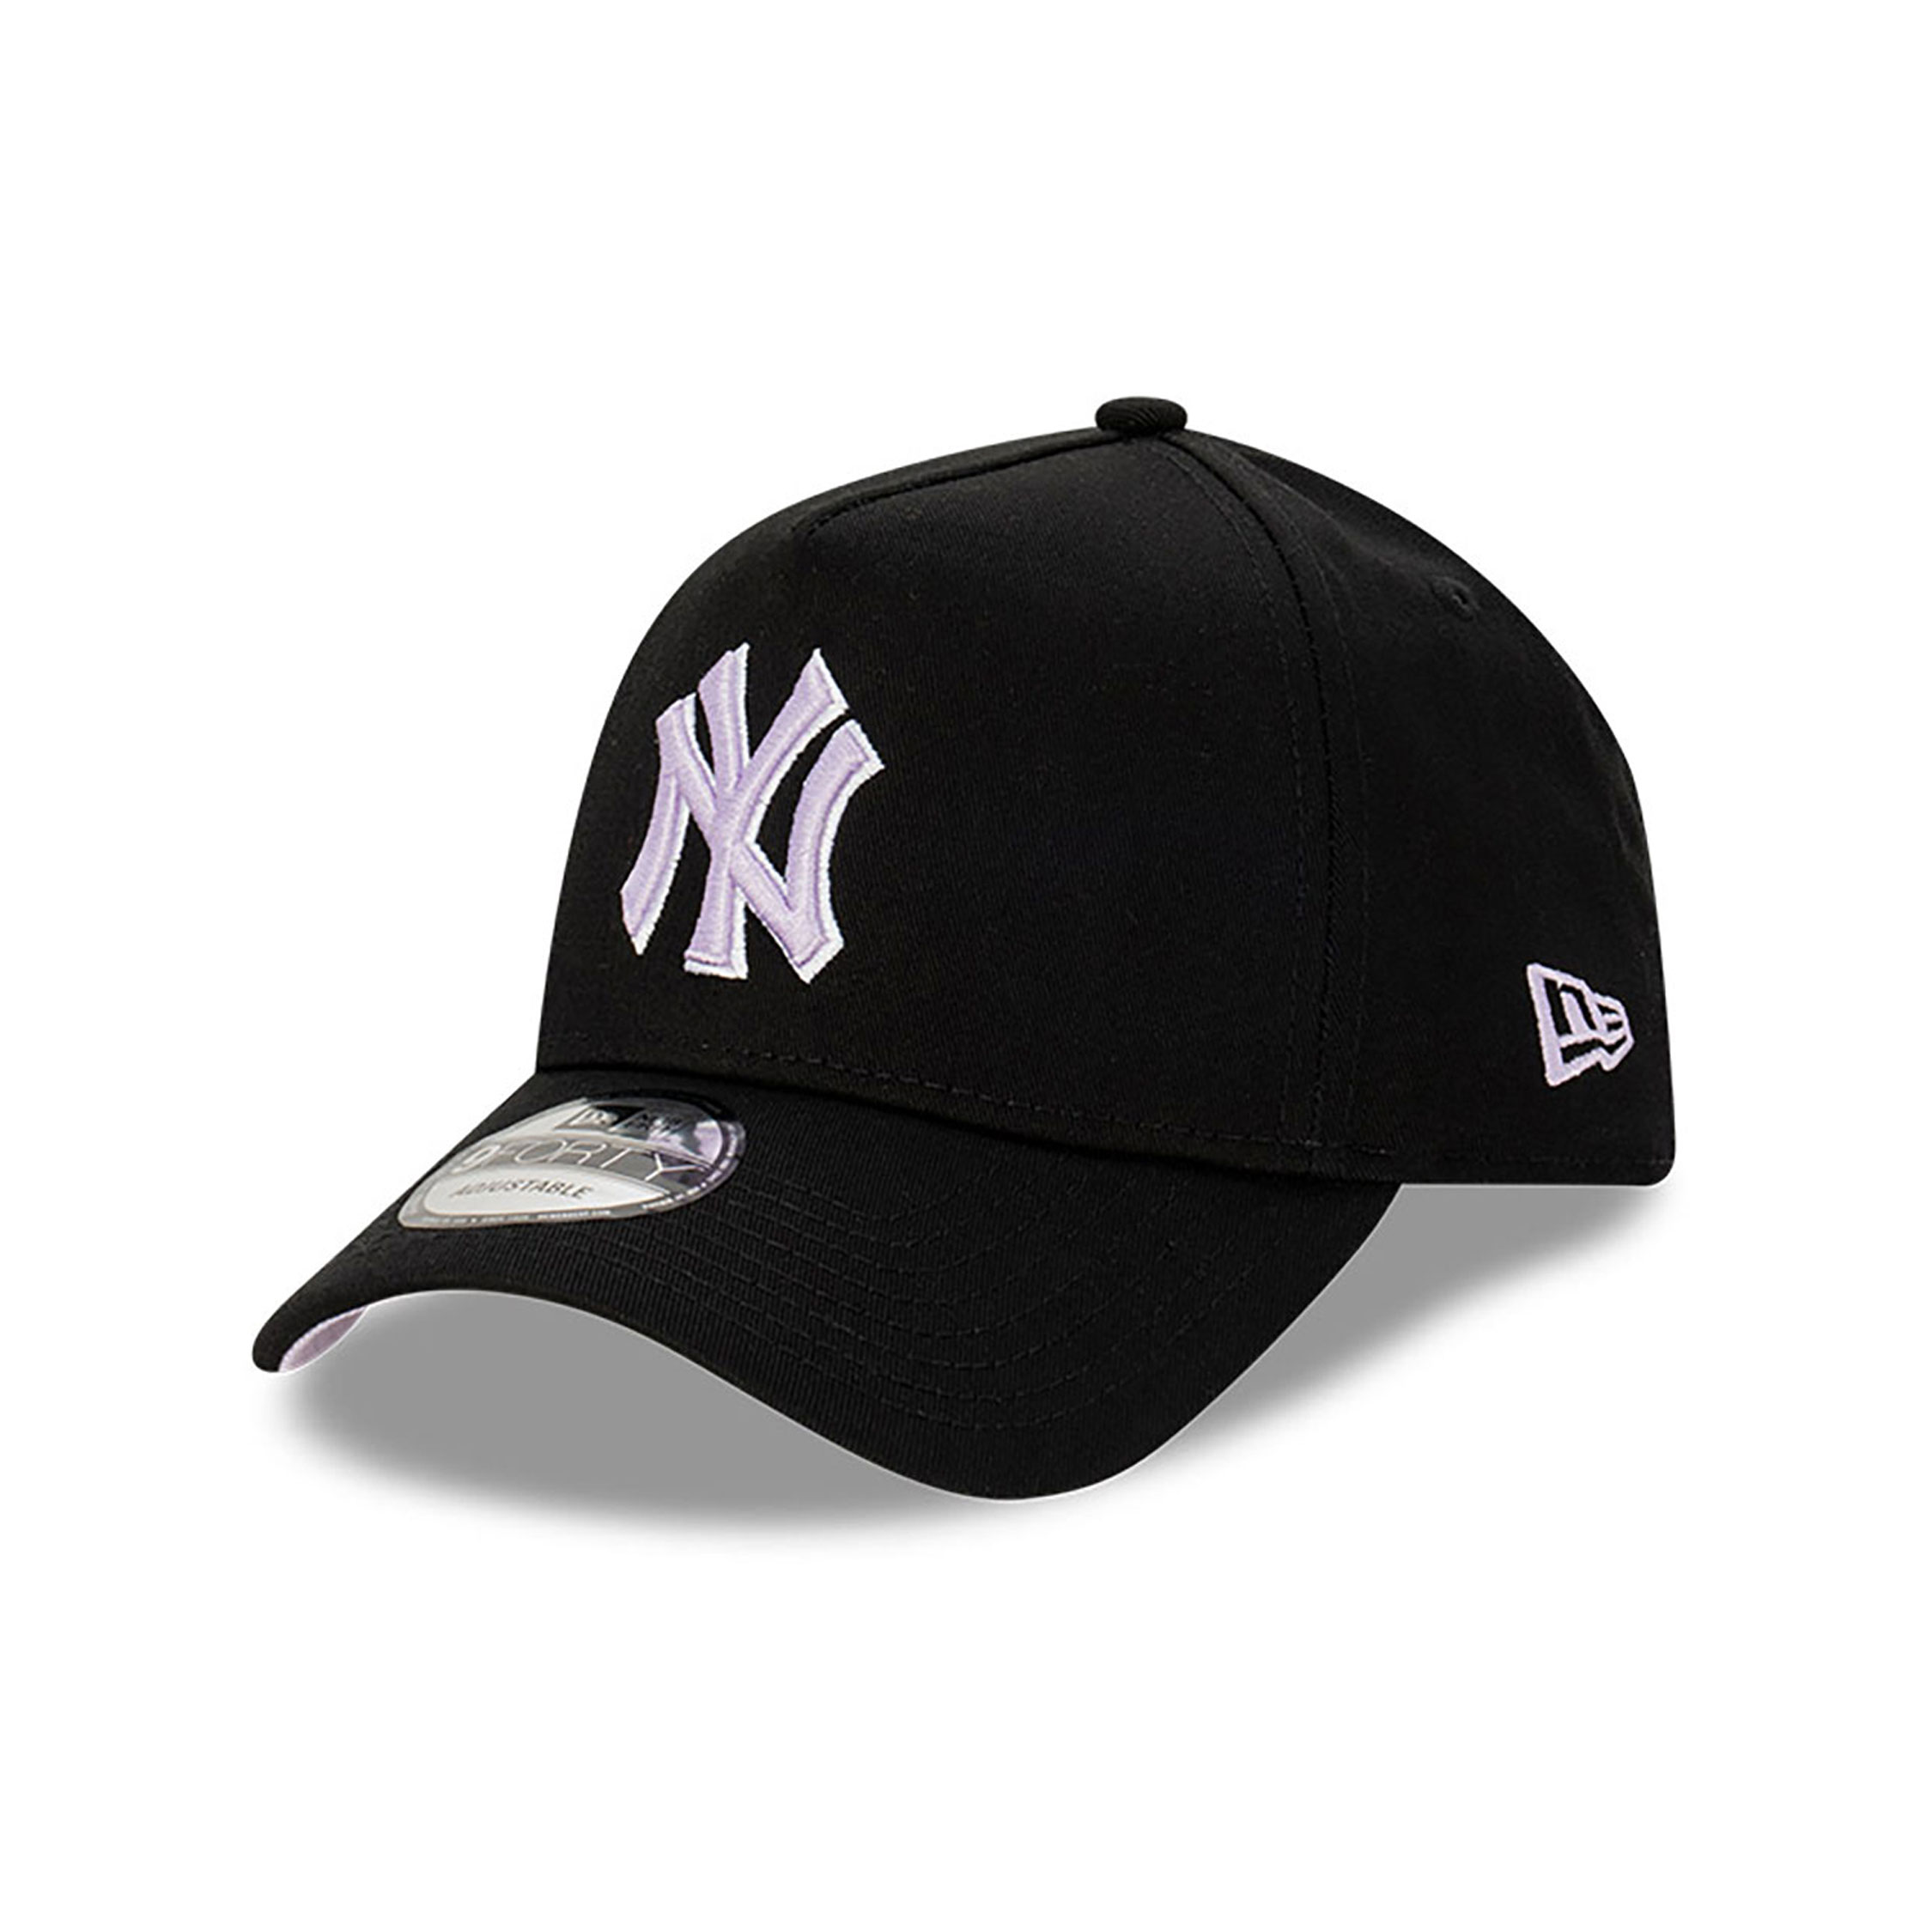 New York Yankees Black Lilac 9FORTY A-Frame Adjustable Cap